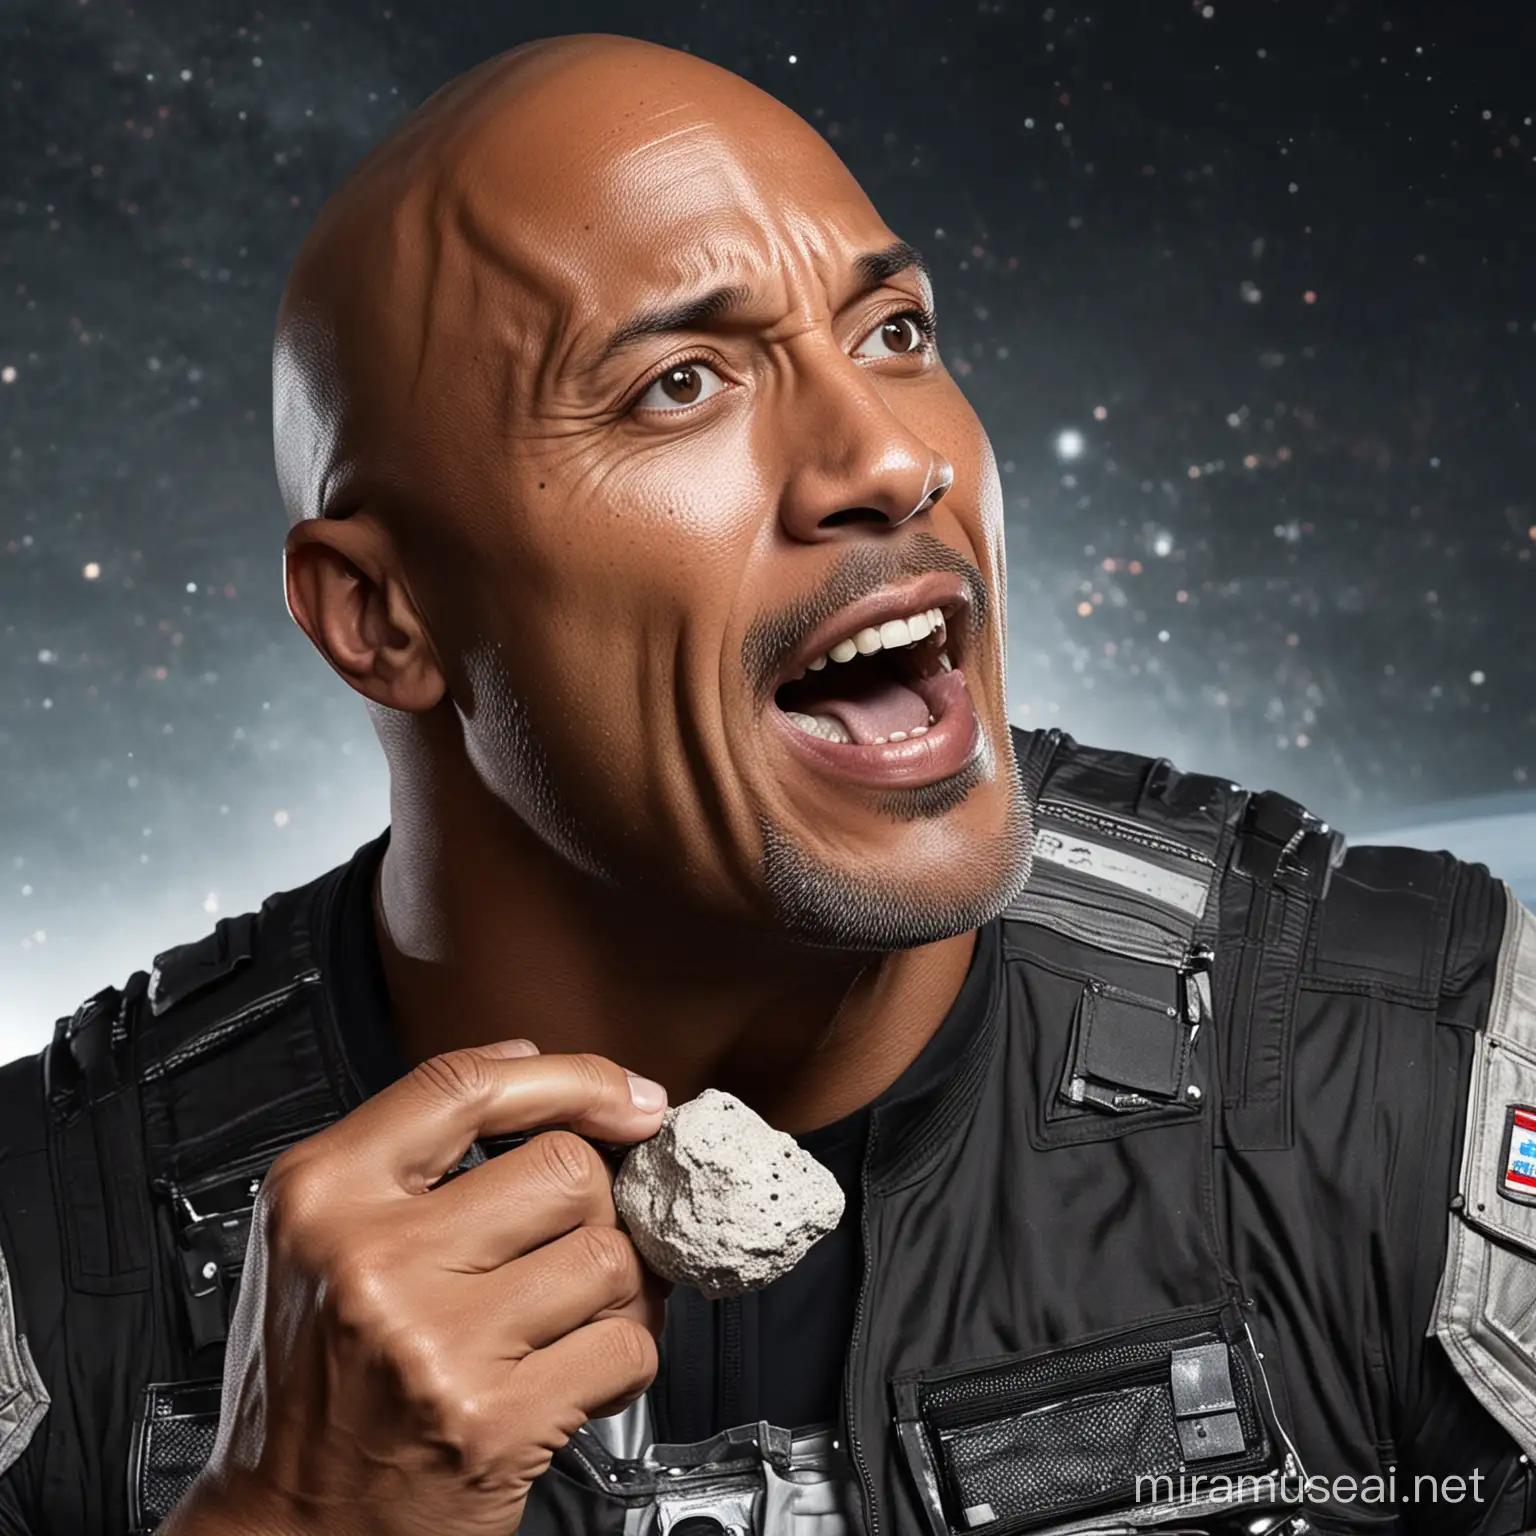 The rock eating rocks in space